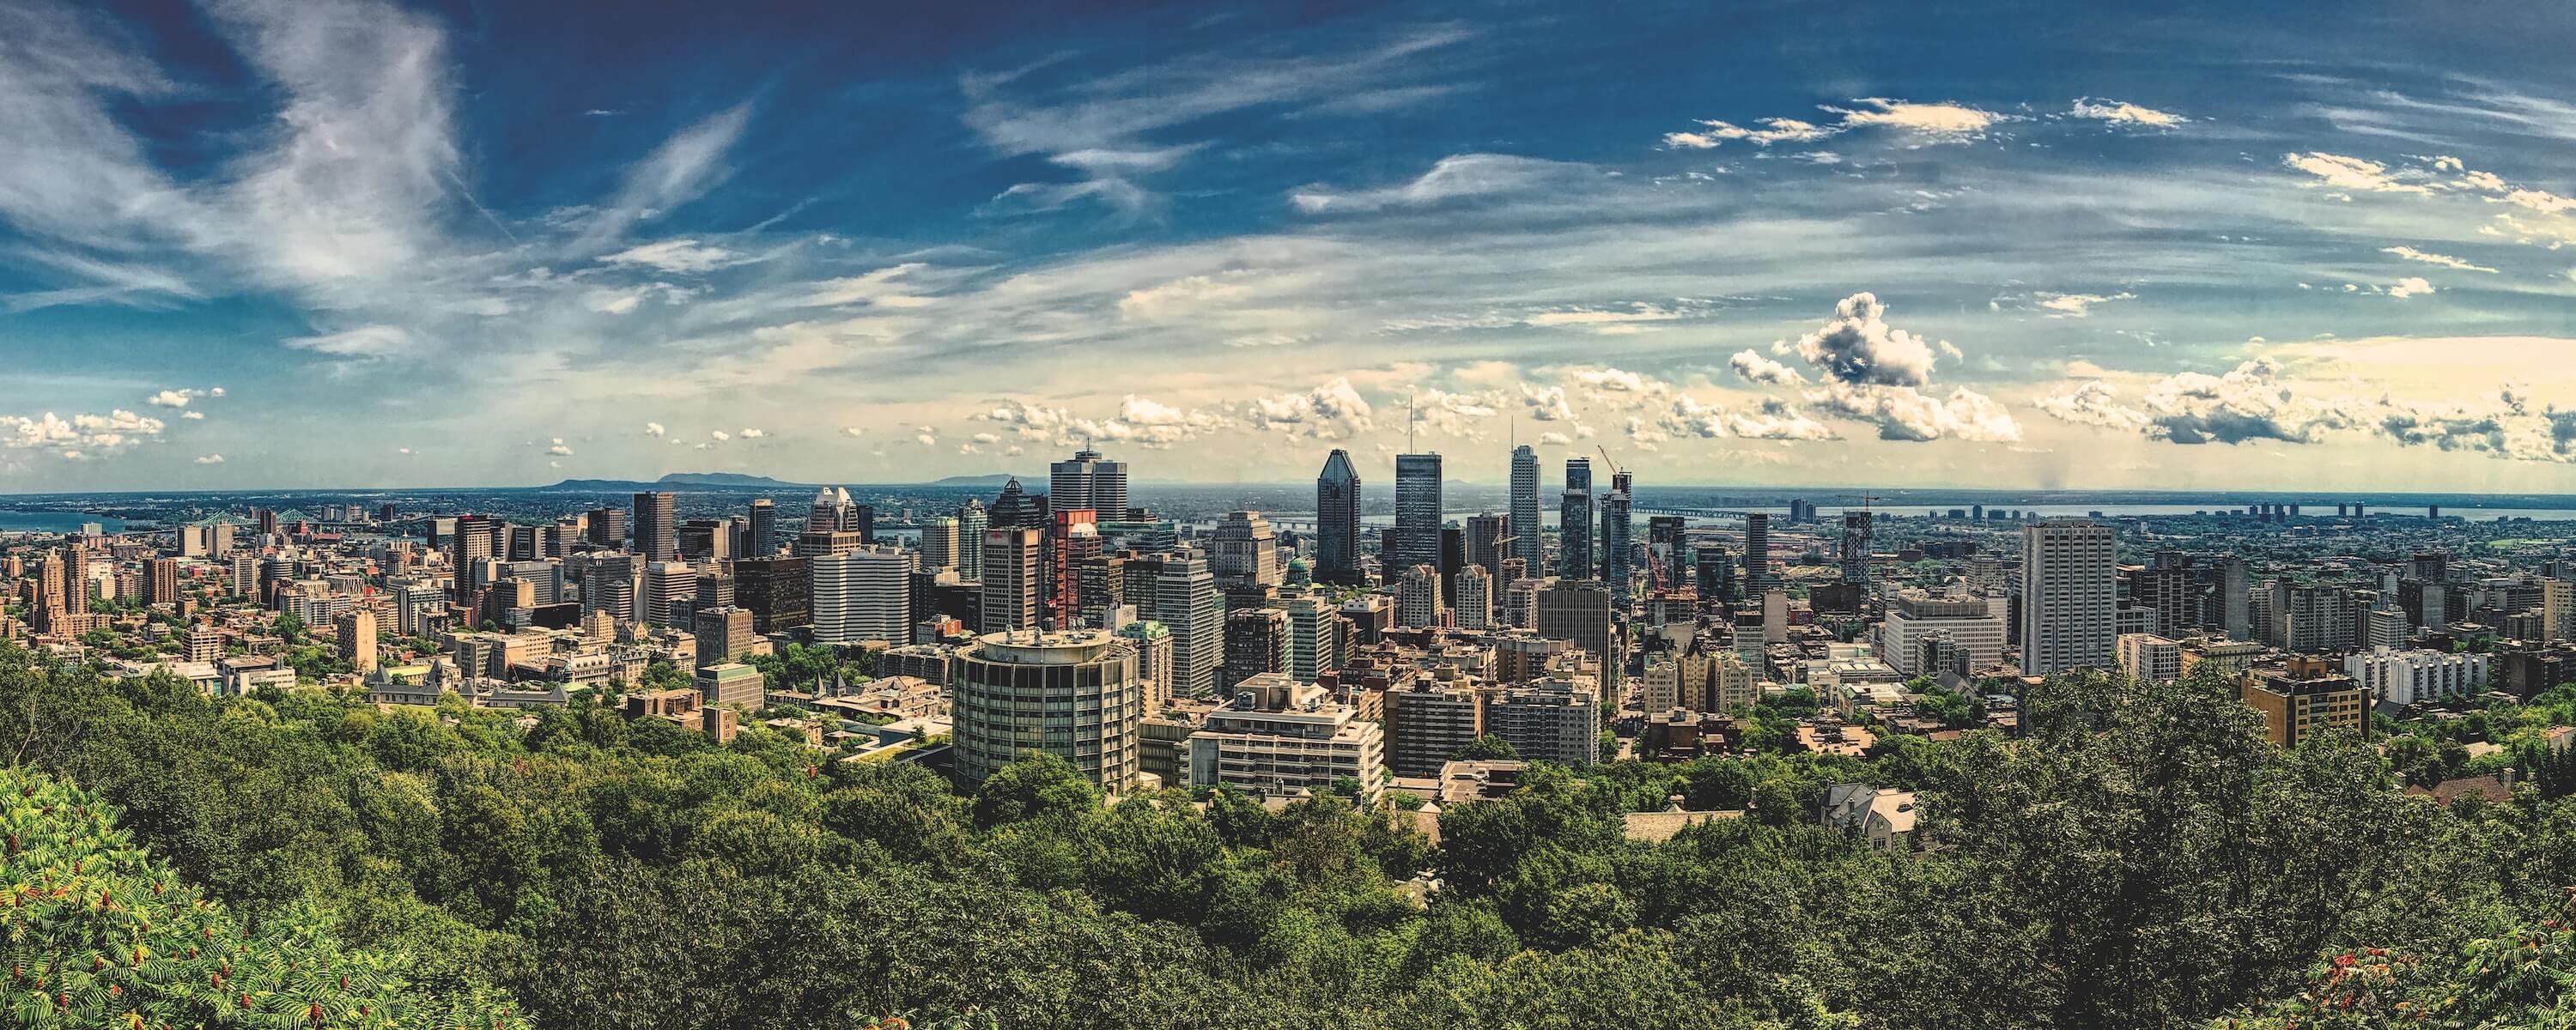 Montreal Cityscape by Matthias Mullie